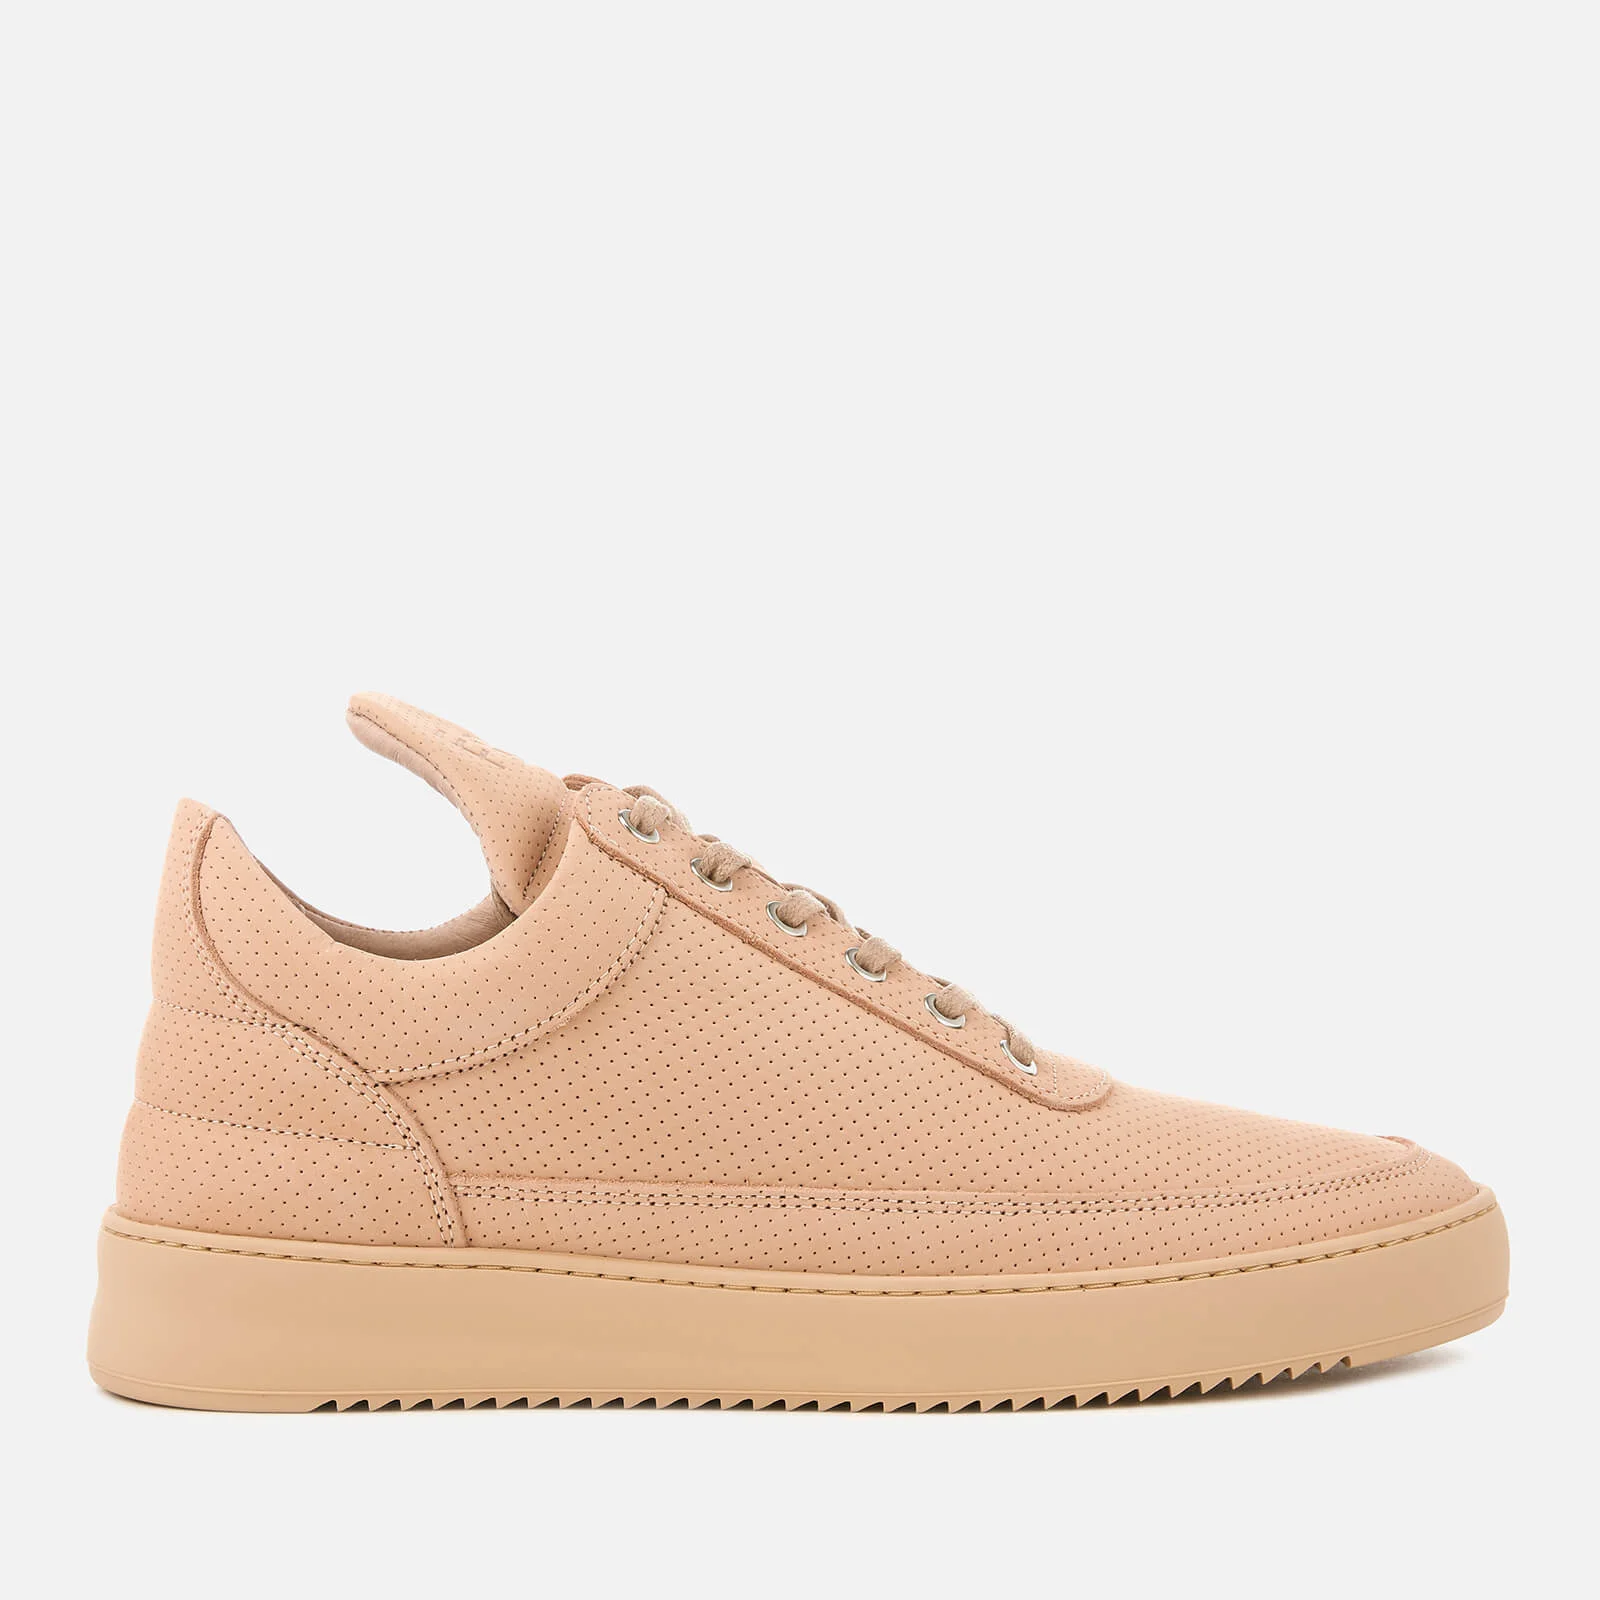 Filling Pieces Men's Nubuck Perforated Low Top Trainers - Nude Image 1